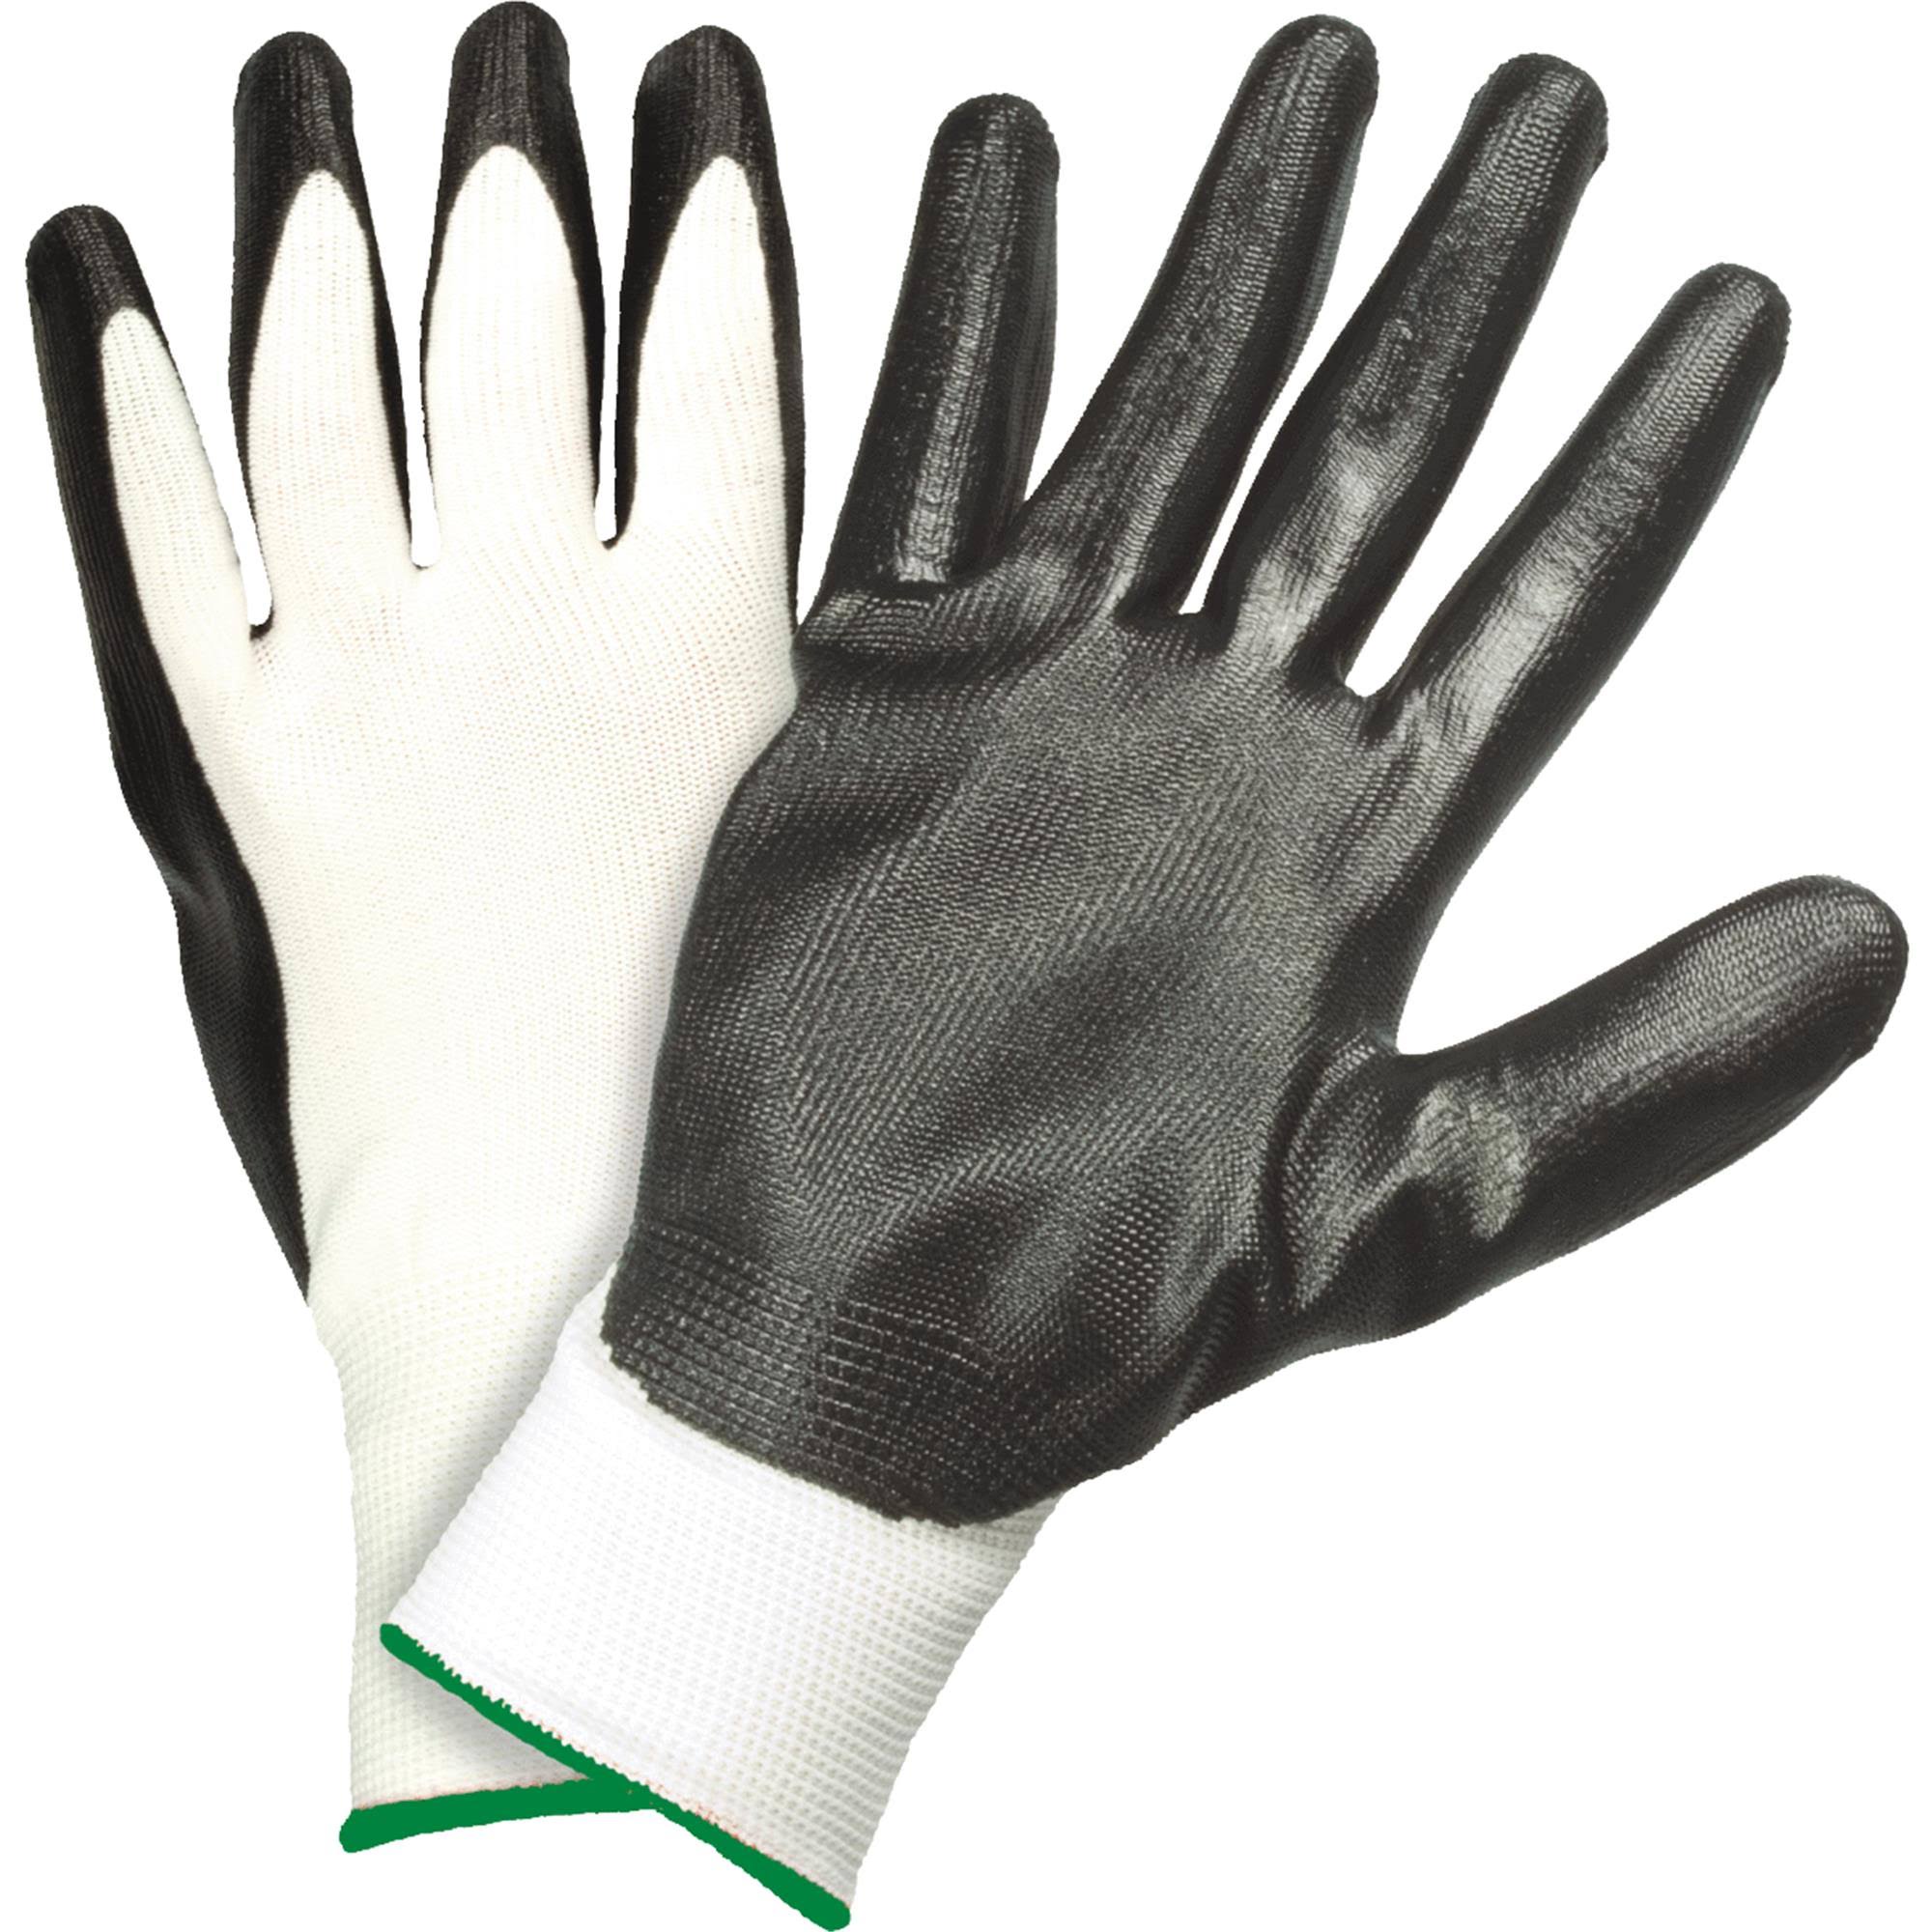 West Chester Nitrile DIP Gloves - Large, 5ct